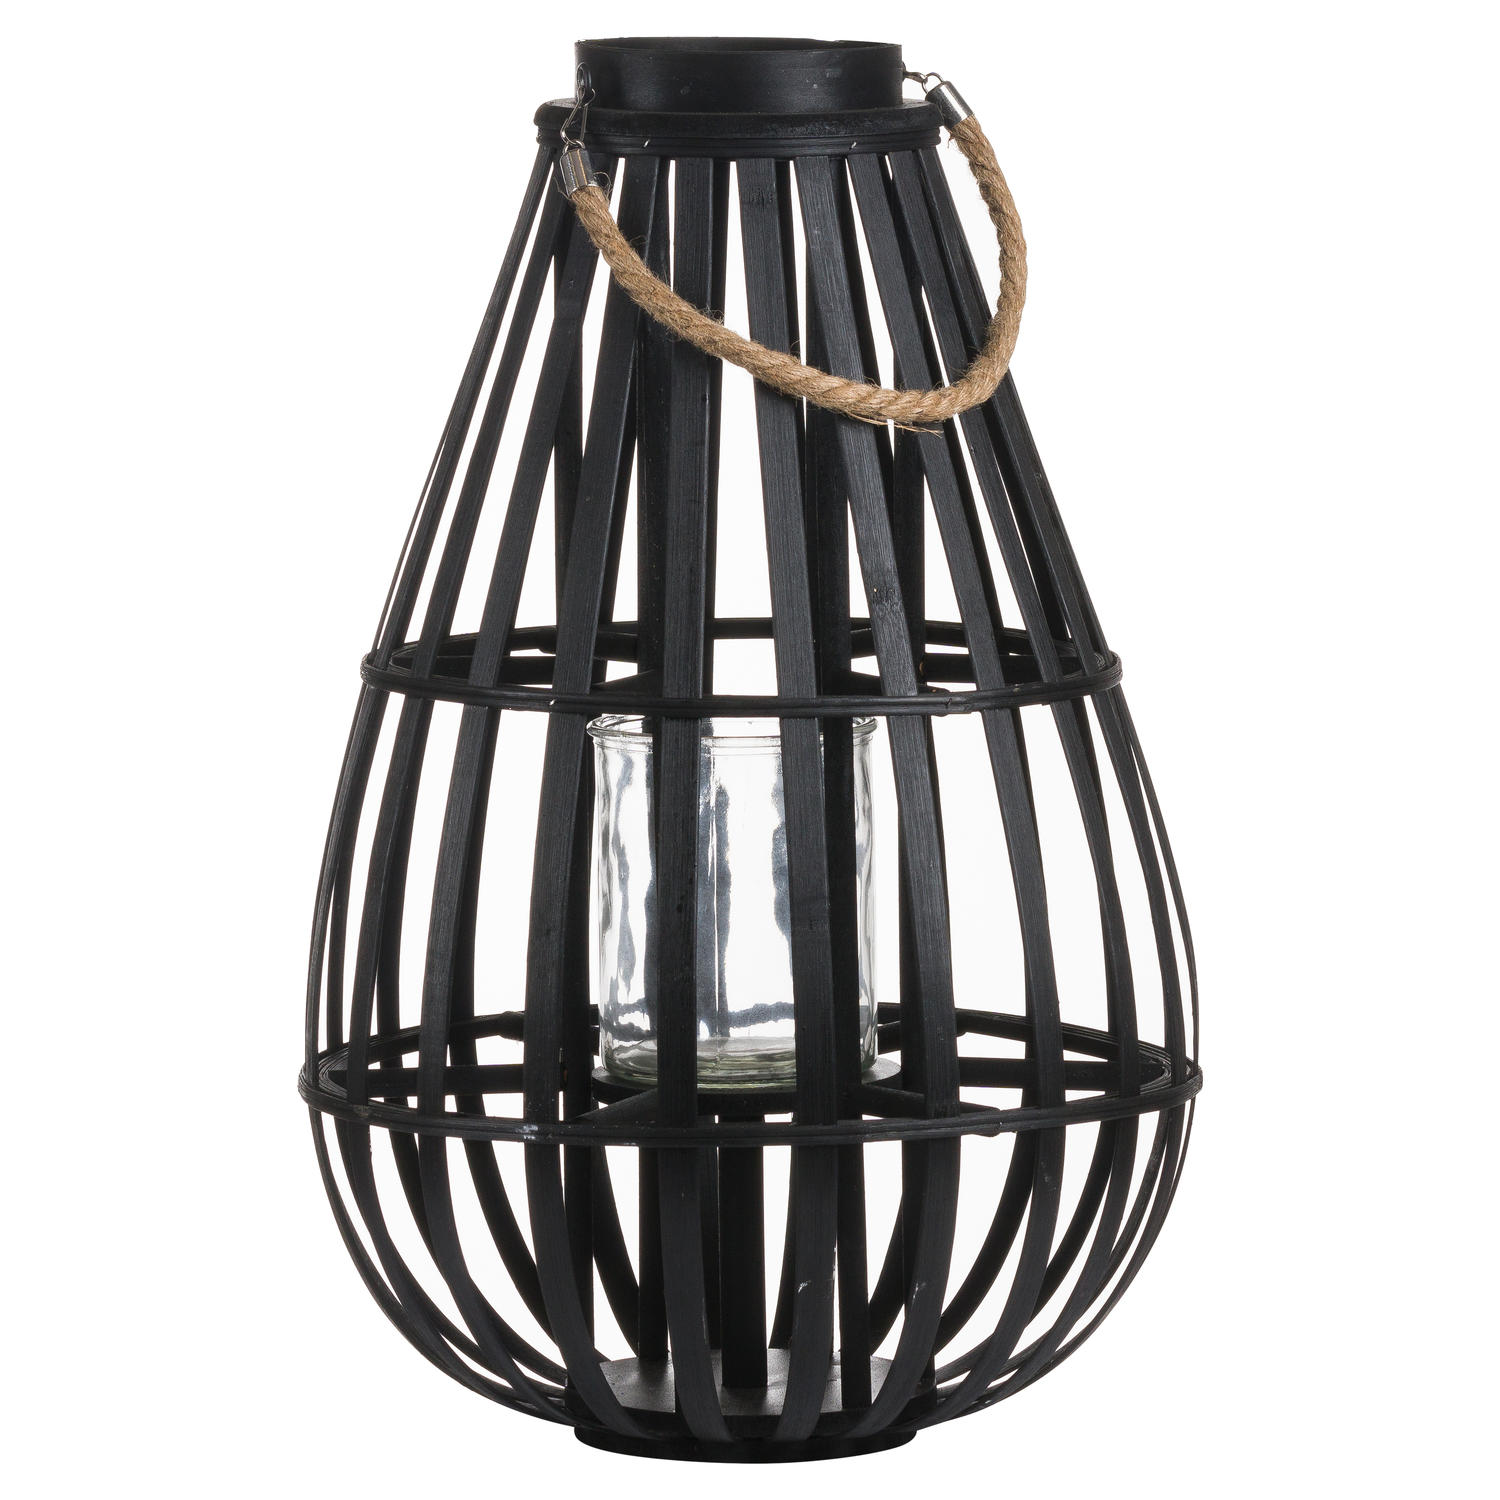 Floor Standing Domed Wicker Lantern With Rope Detail - Image 1